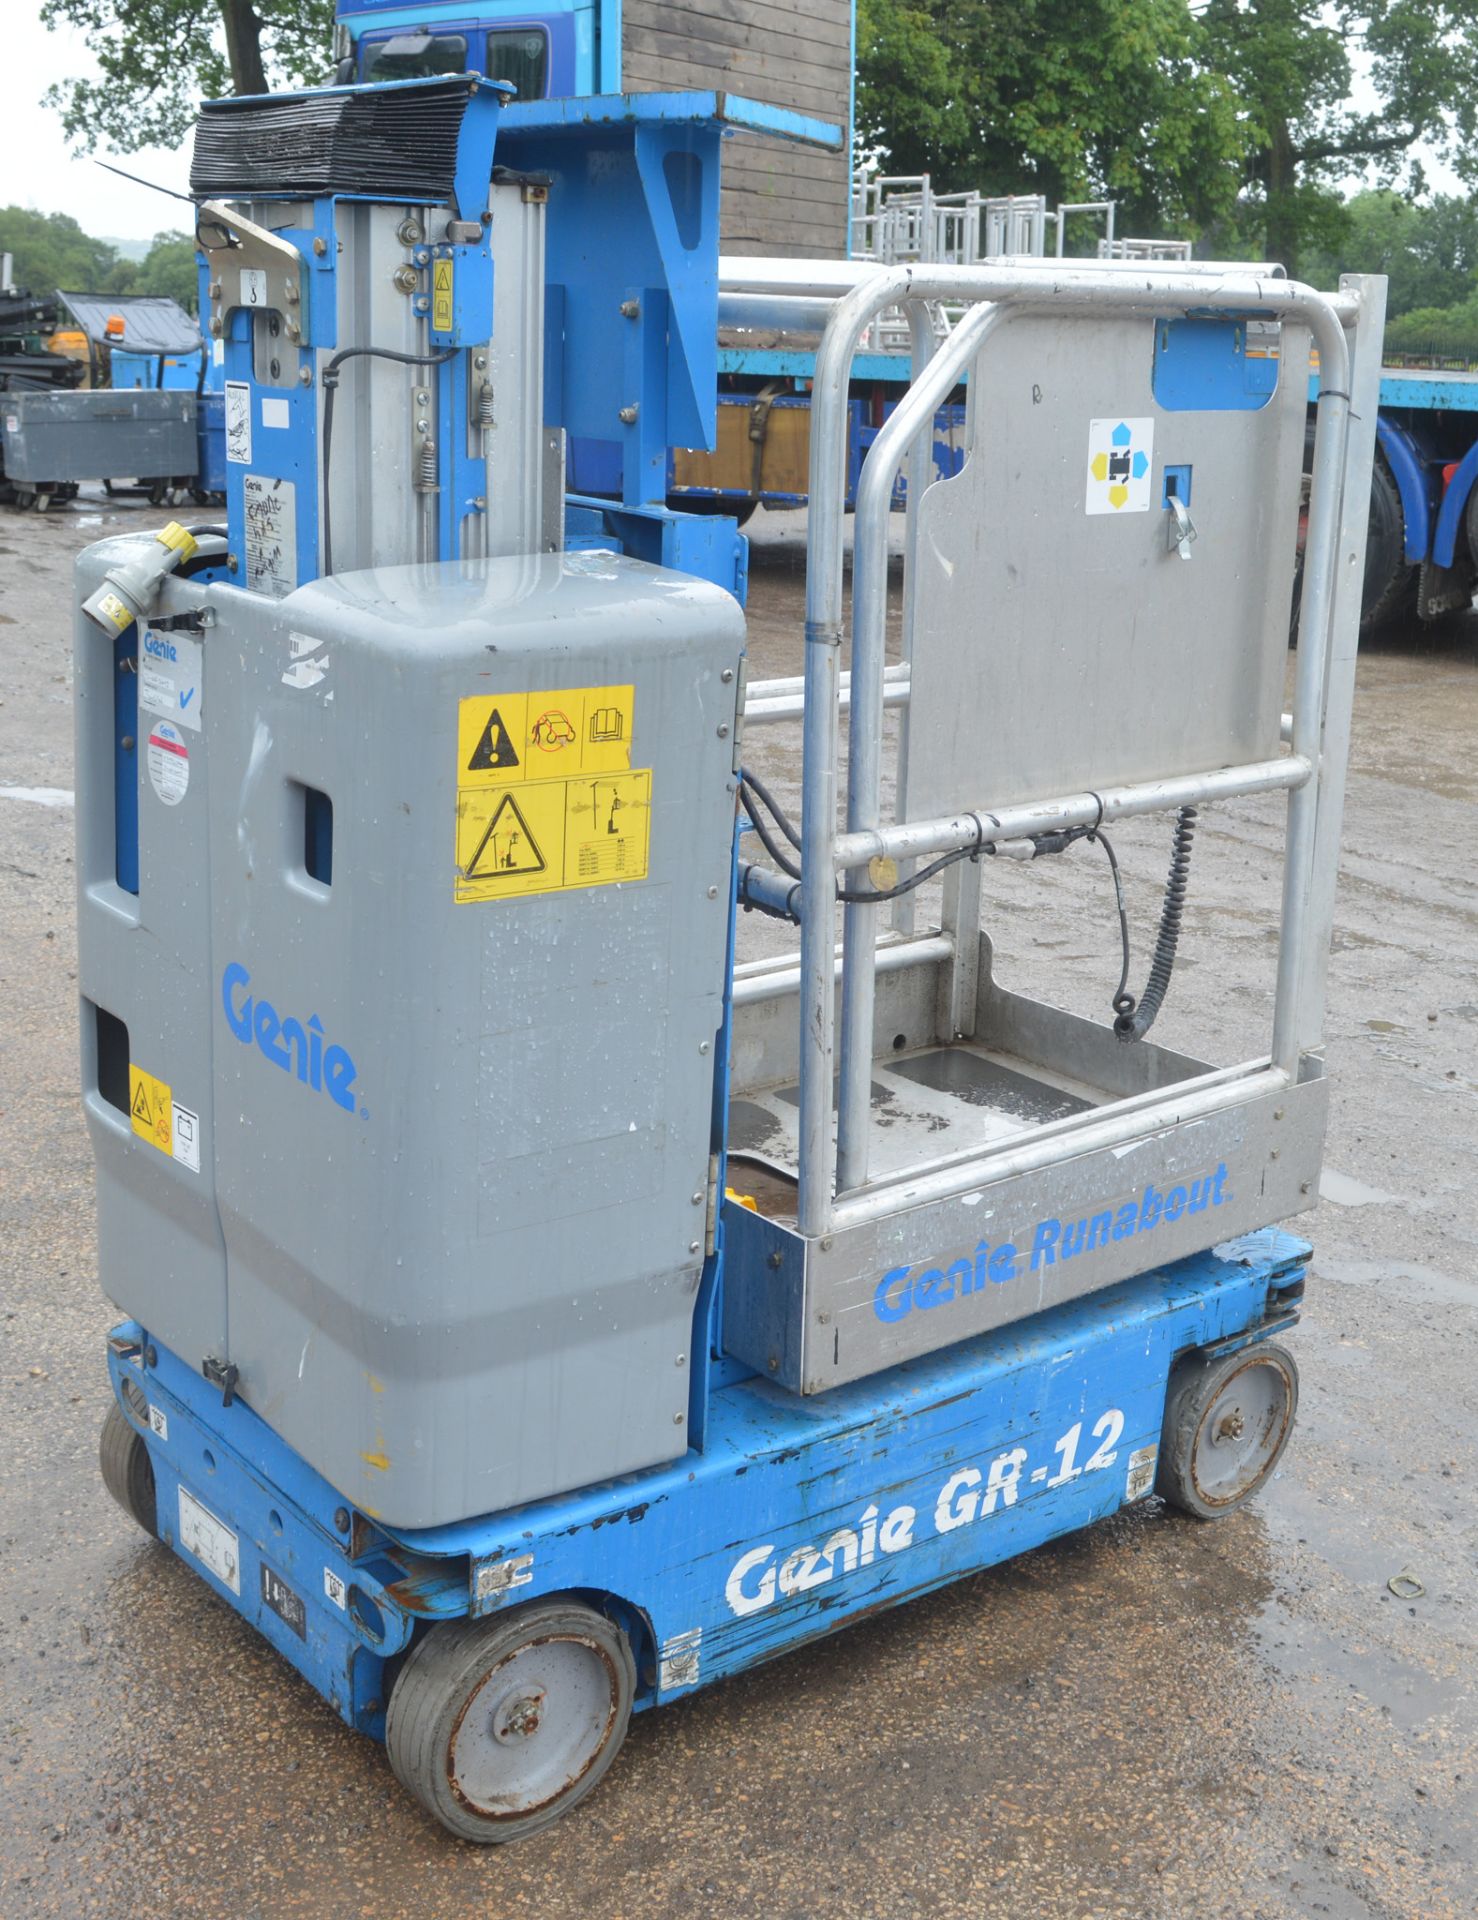 Genie Runabout GR-12 battery electric scissor lift  Year: 2013 S/N: 26579 A608642 - Image 4 of 9